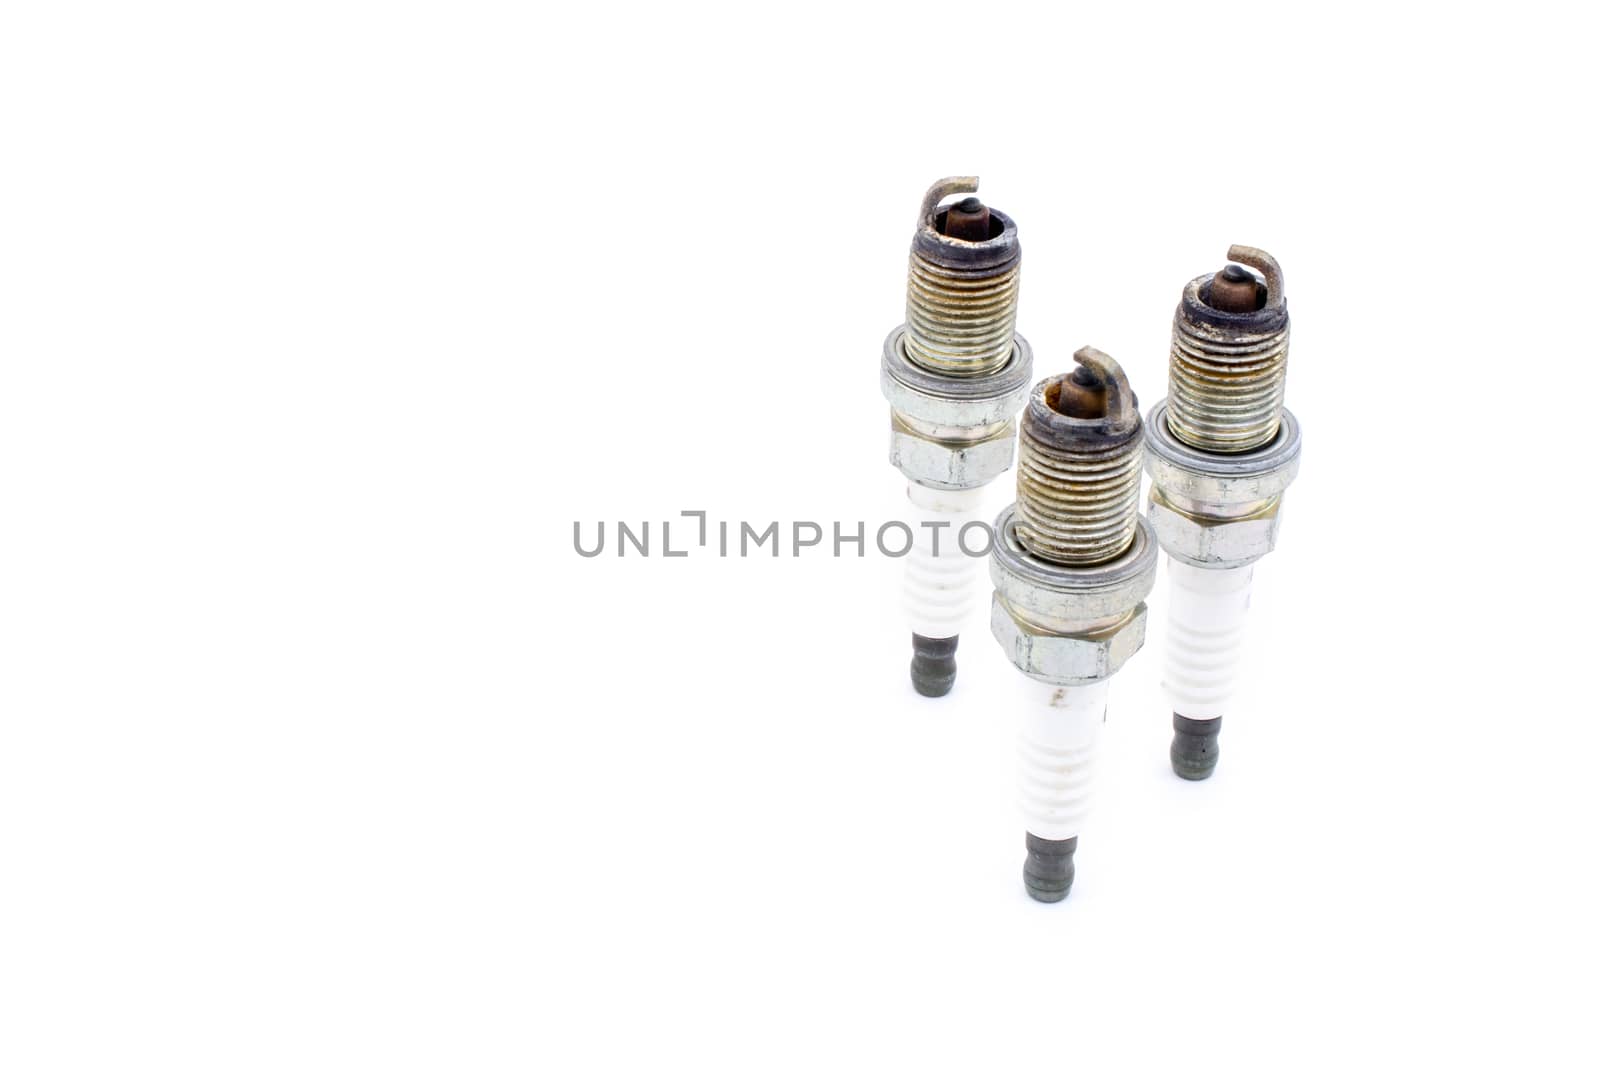 Old spark plug isolated on the white